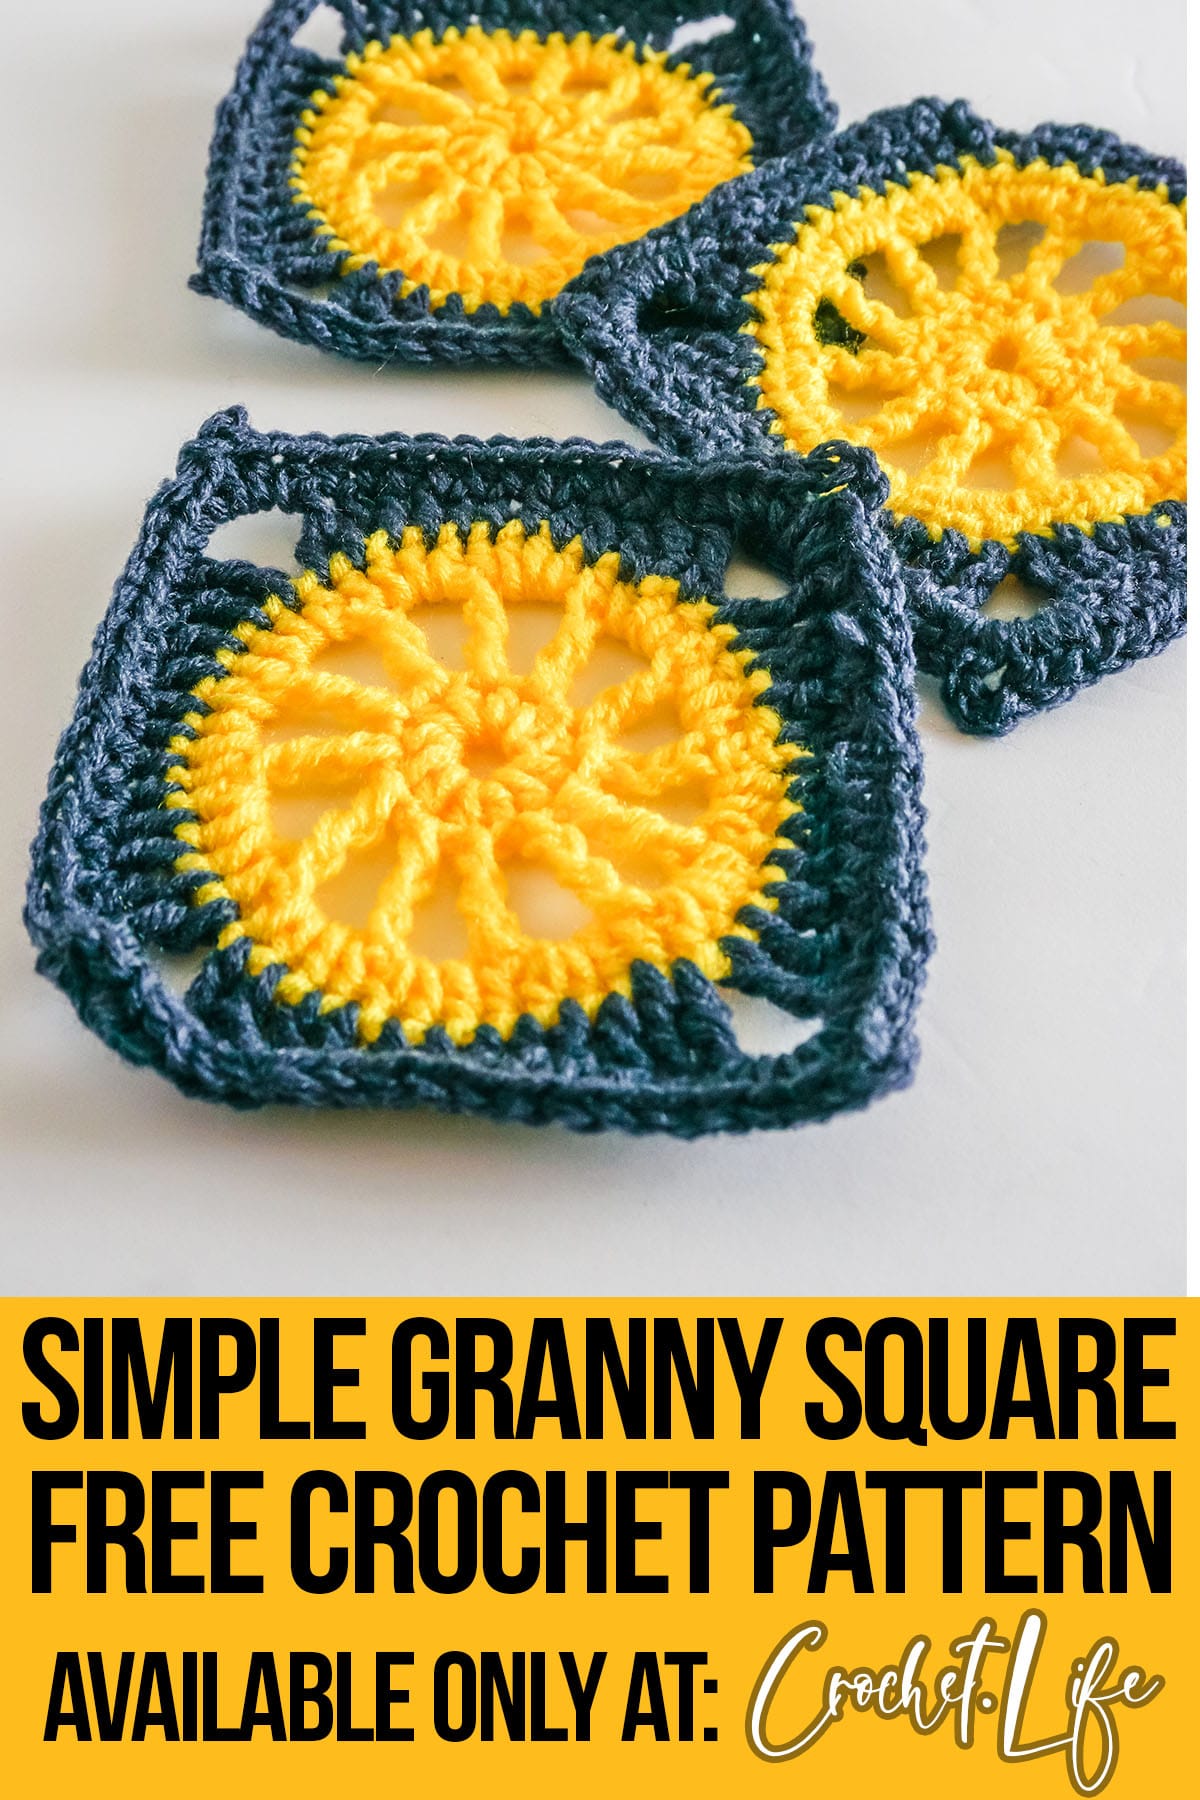 easy sun granny square crochet pattern with text which reads simple simple granny square free crochet pattern